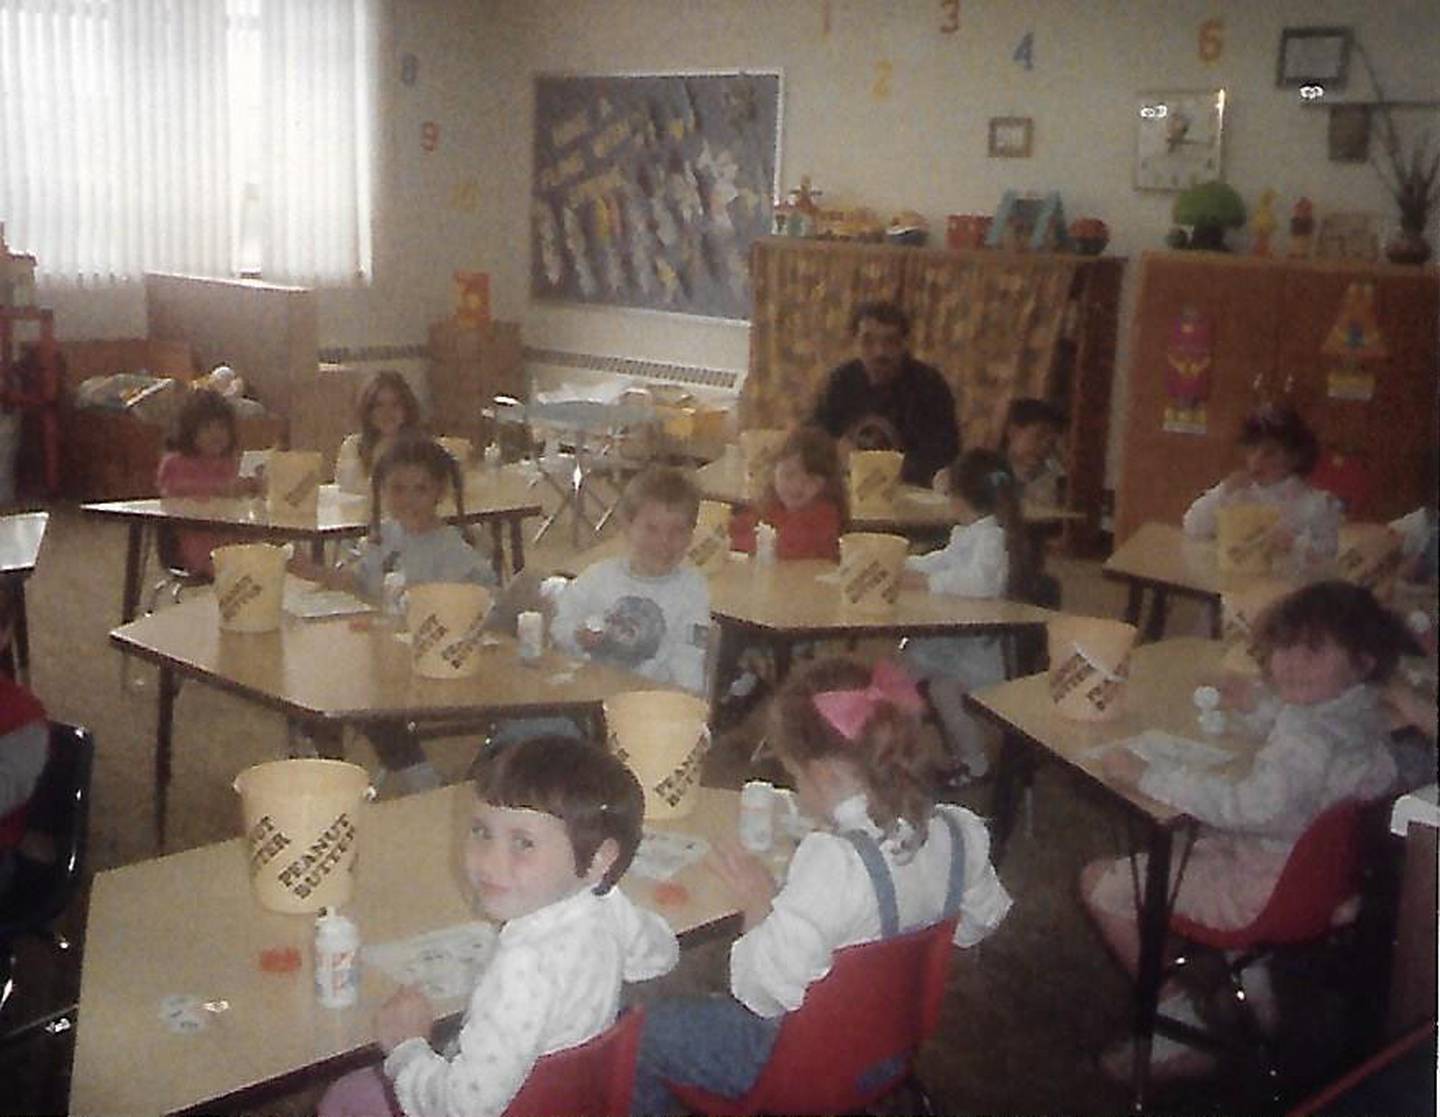 Holy Trinity Lutheran Nursery School celebrates its 40th anniversary this year, sharing photos from previous classrooms.